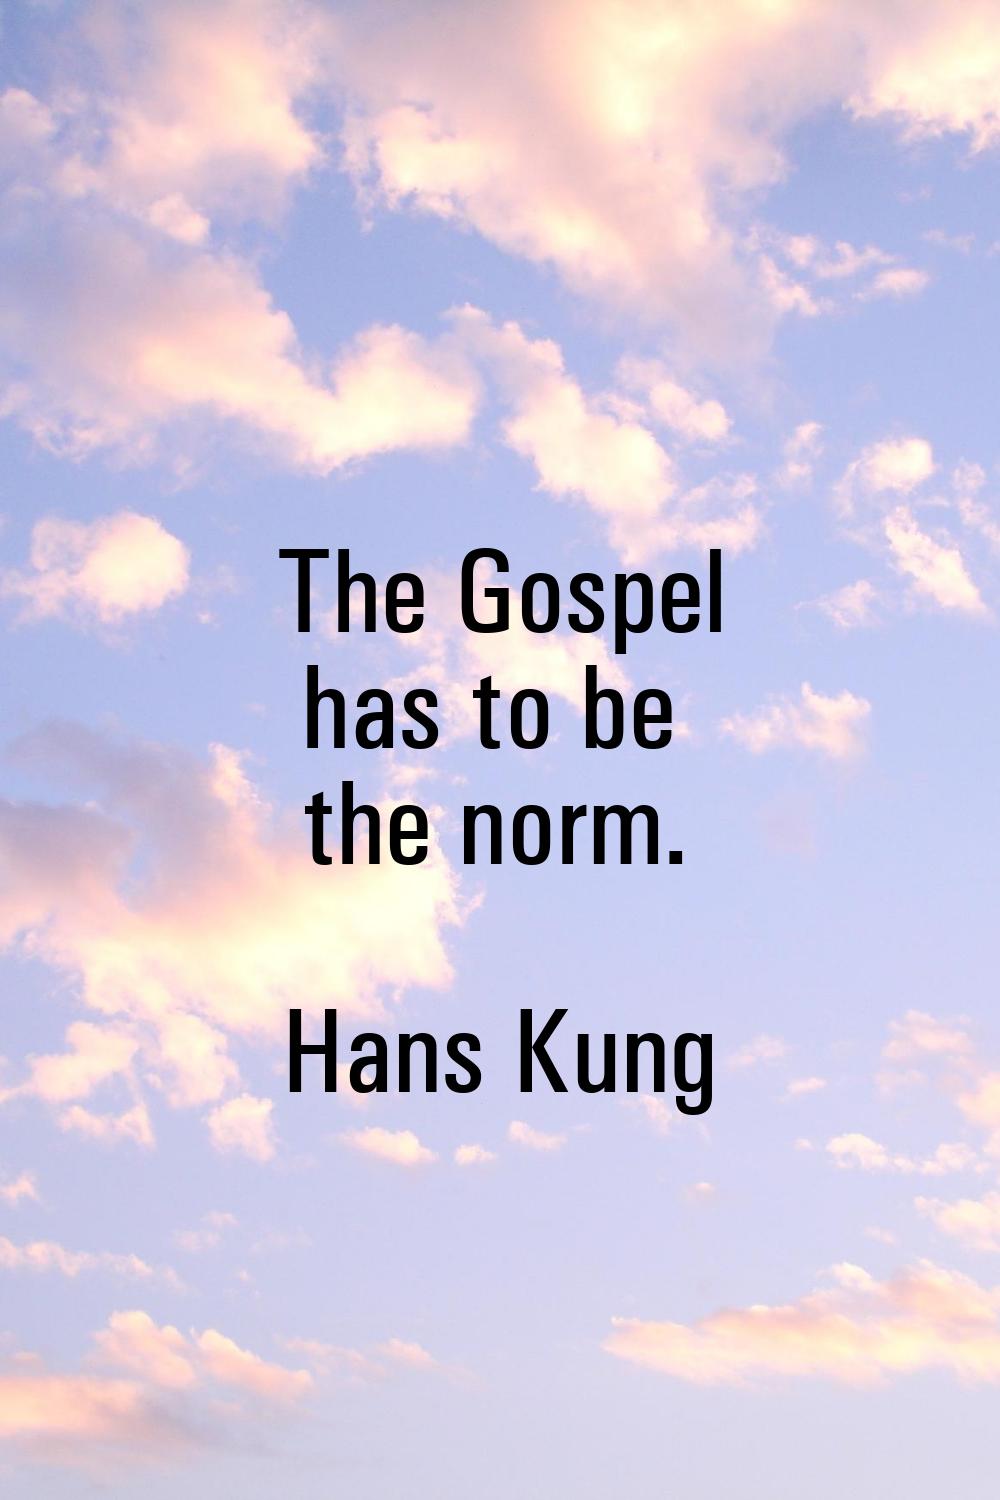 The Gospel has to be the norm.